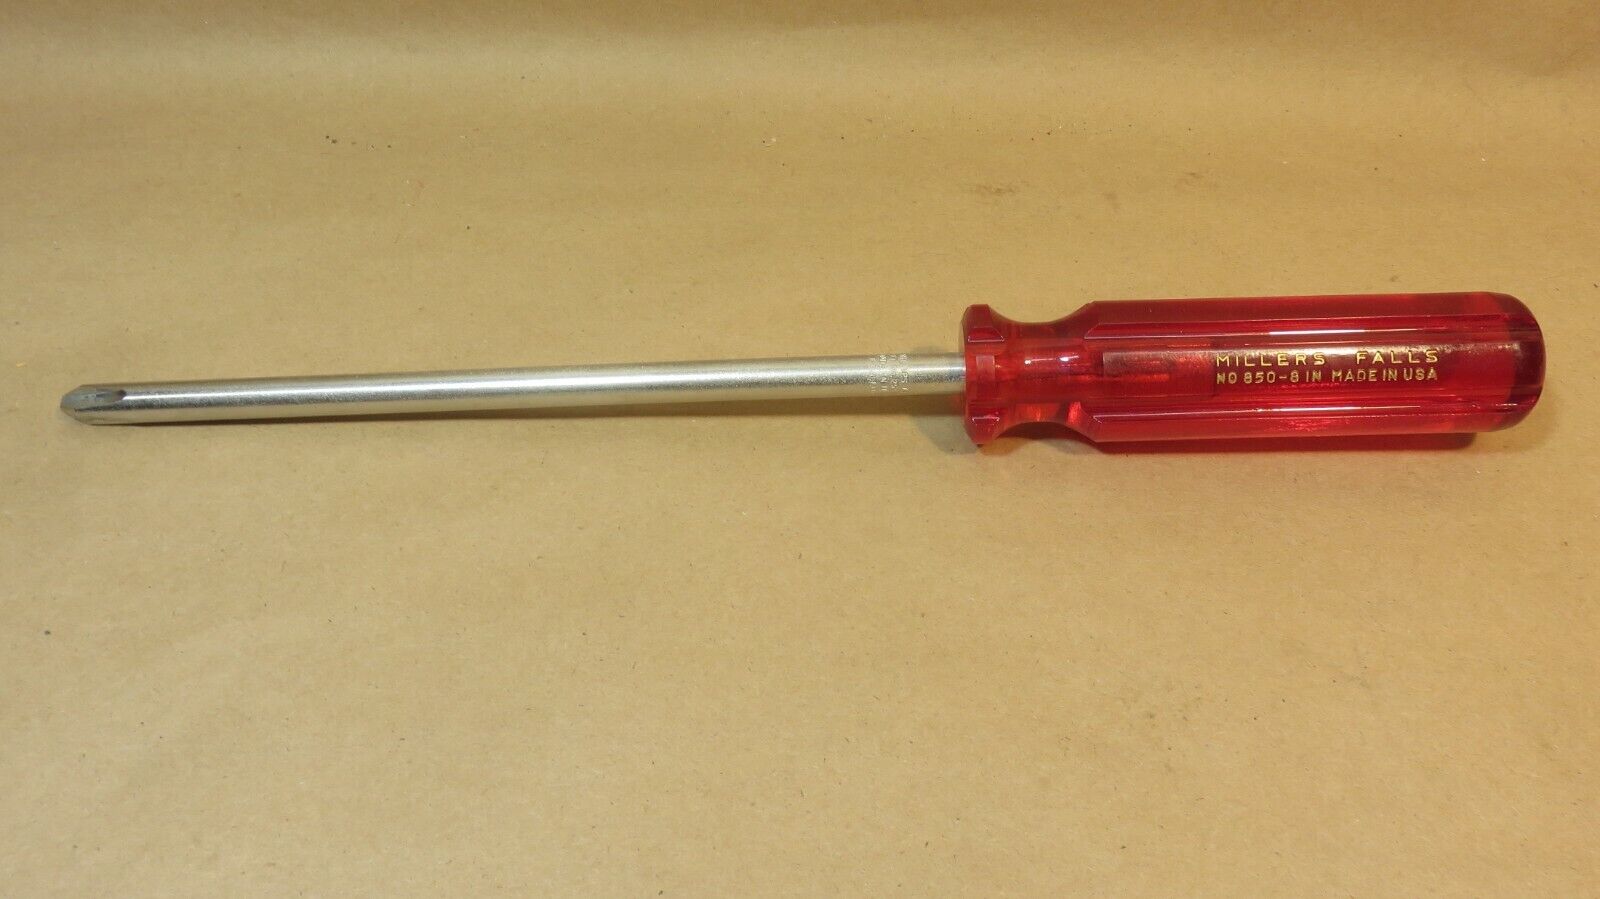 Millers Falls # 850 Phillips Head Screwdriver Made in USA